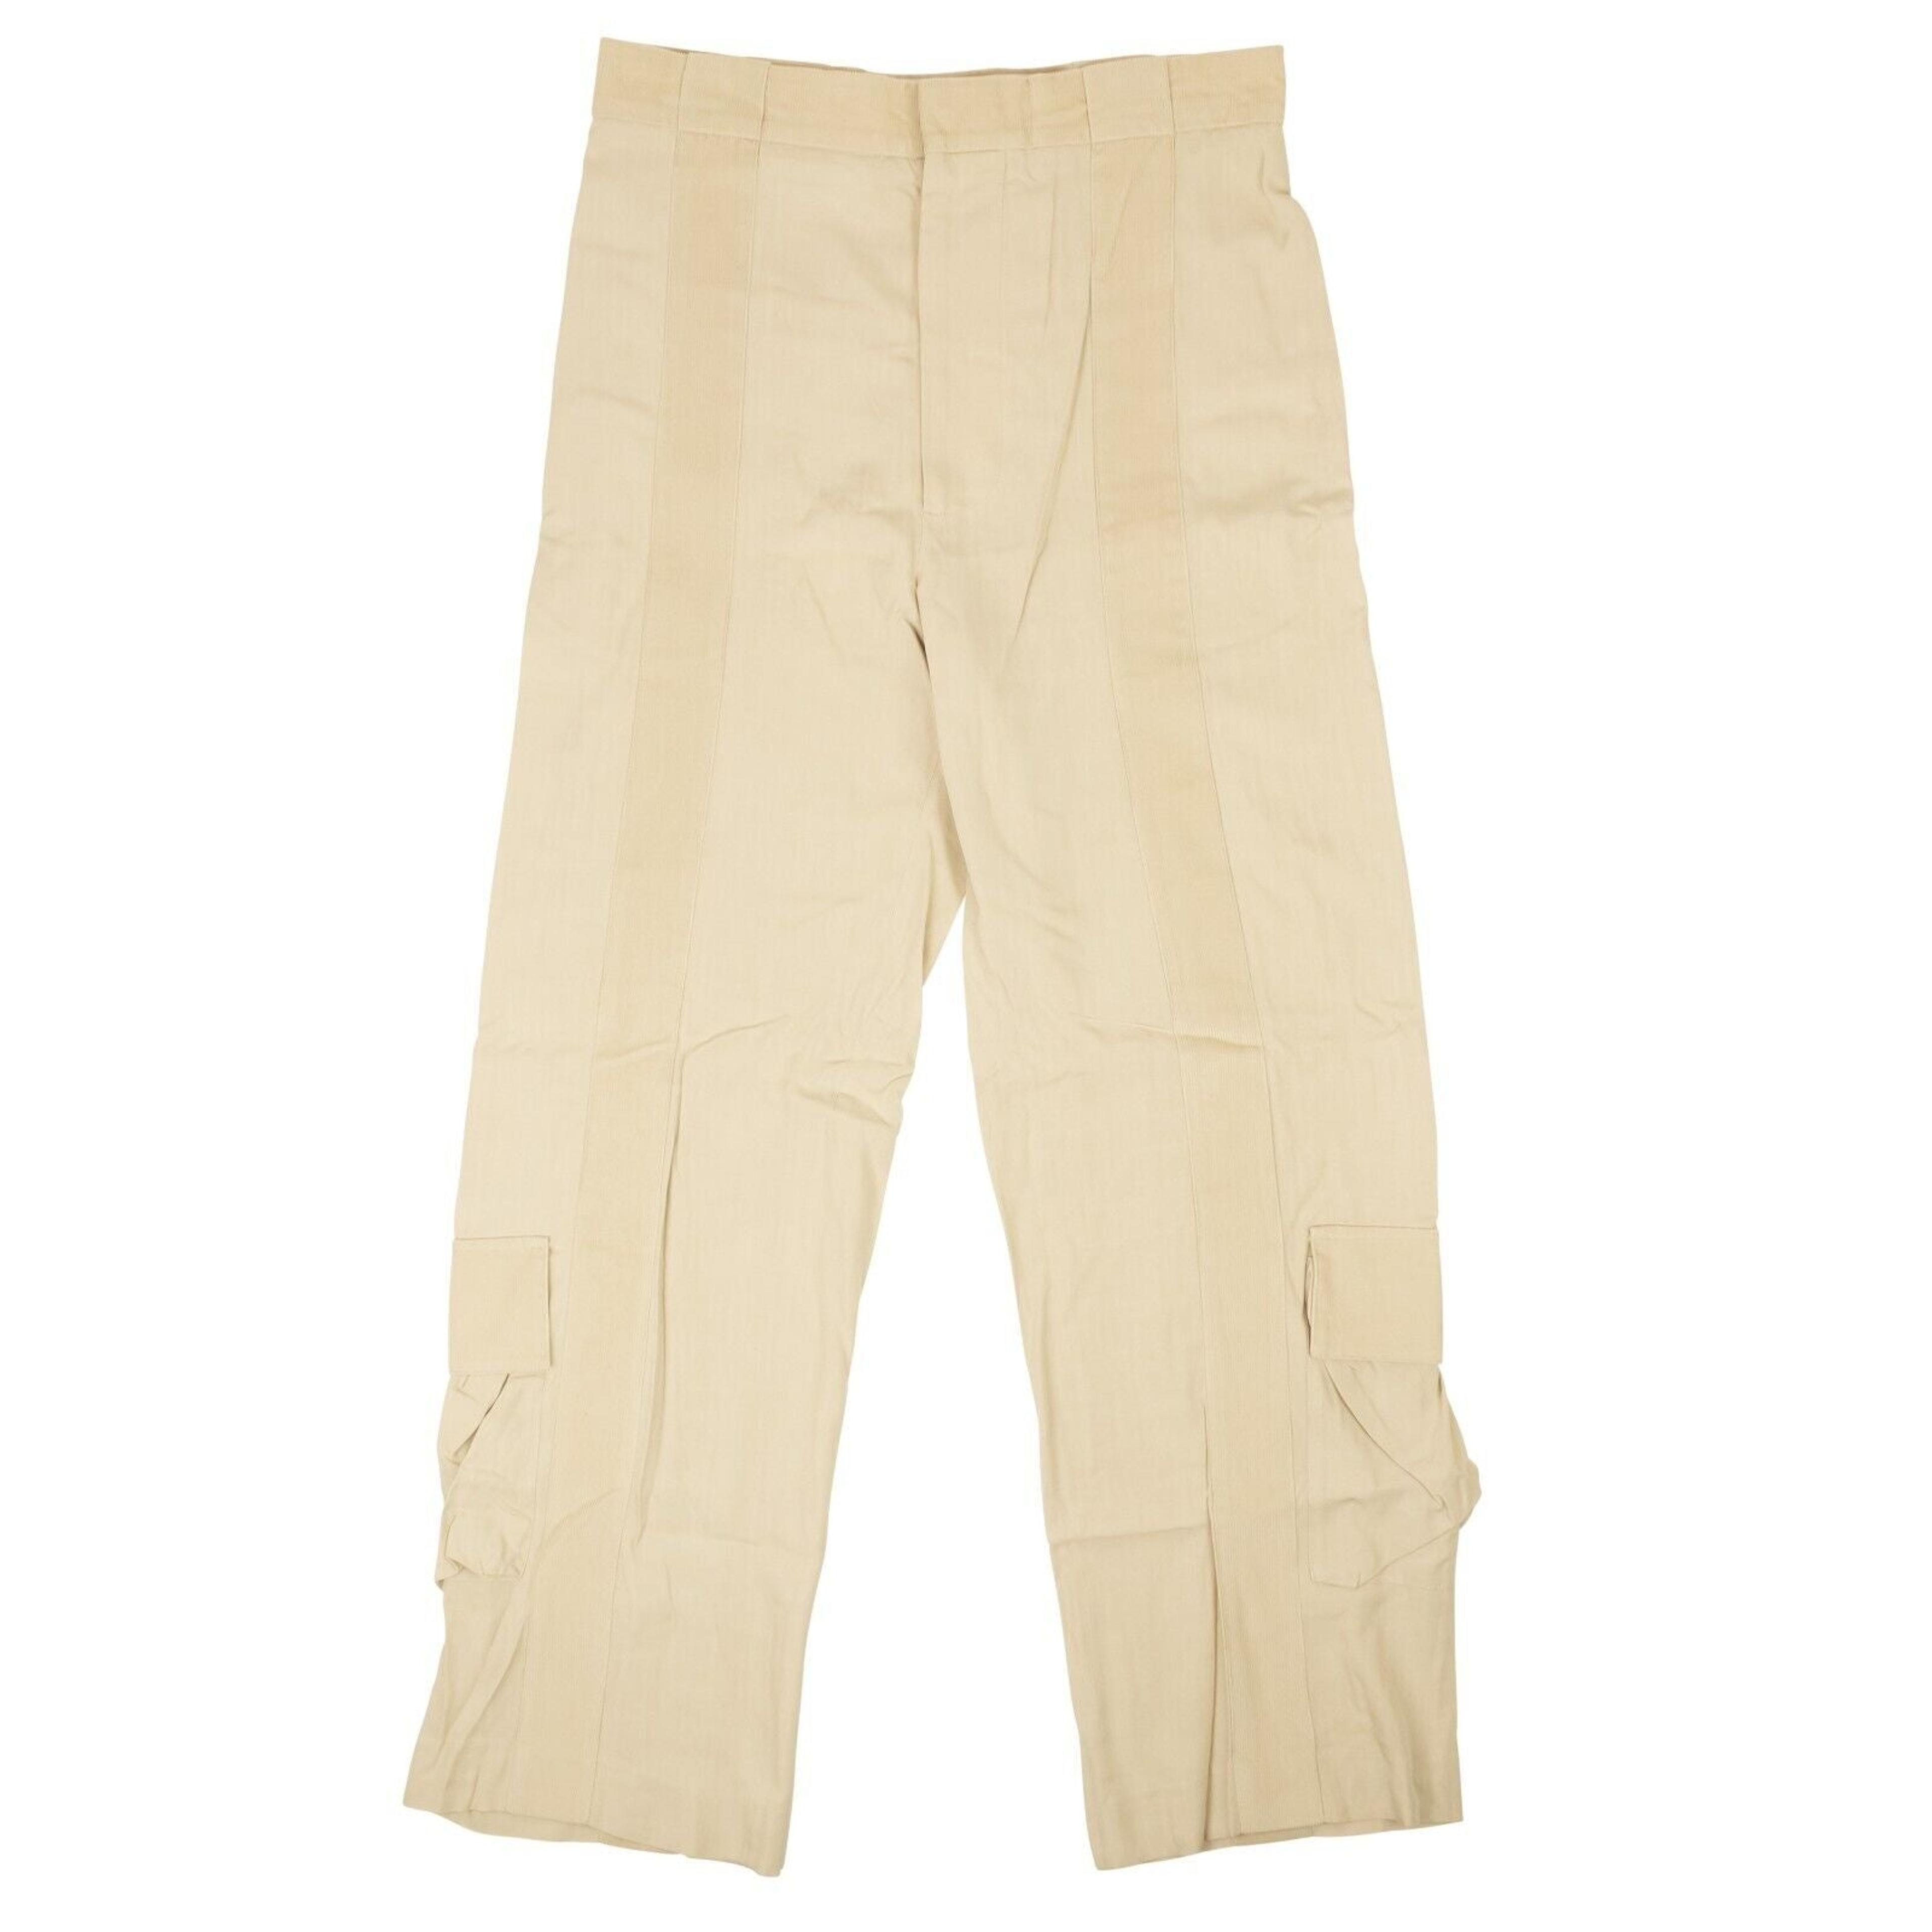 Alternate View 1 of Straw Tan Corduroy Accent Panel Pants